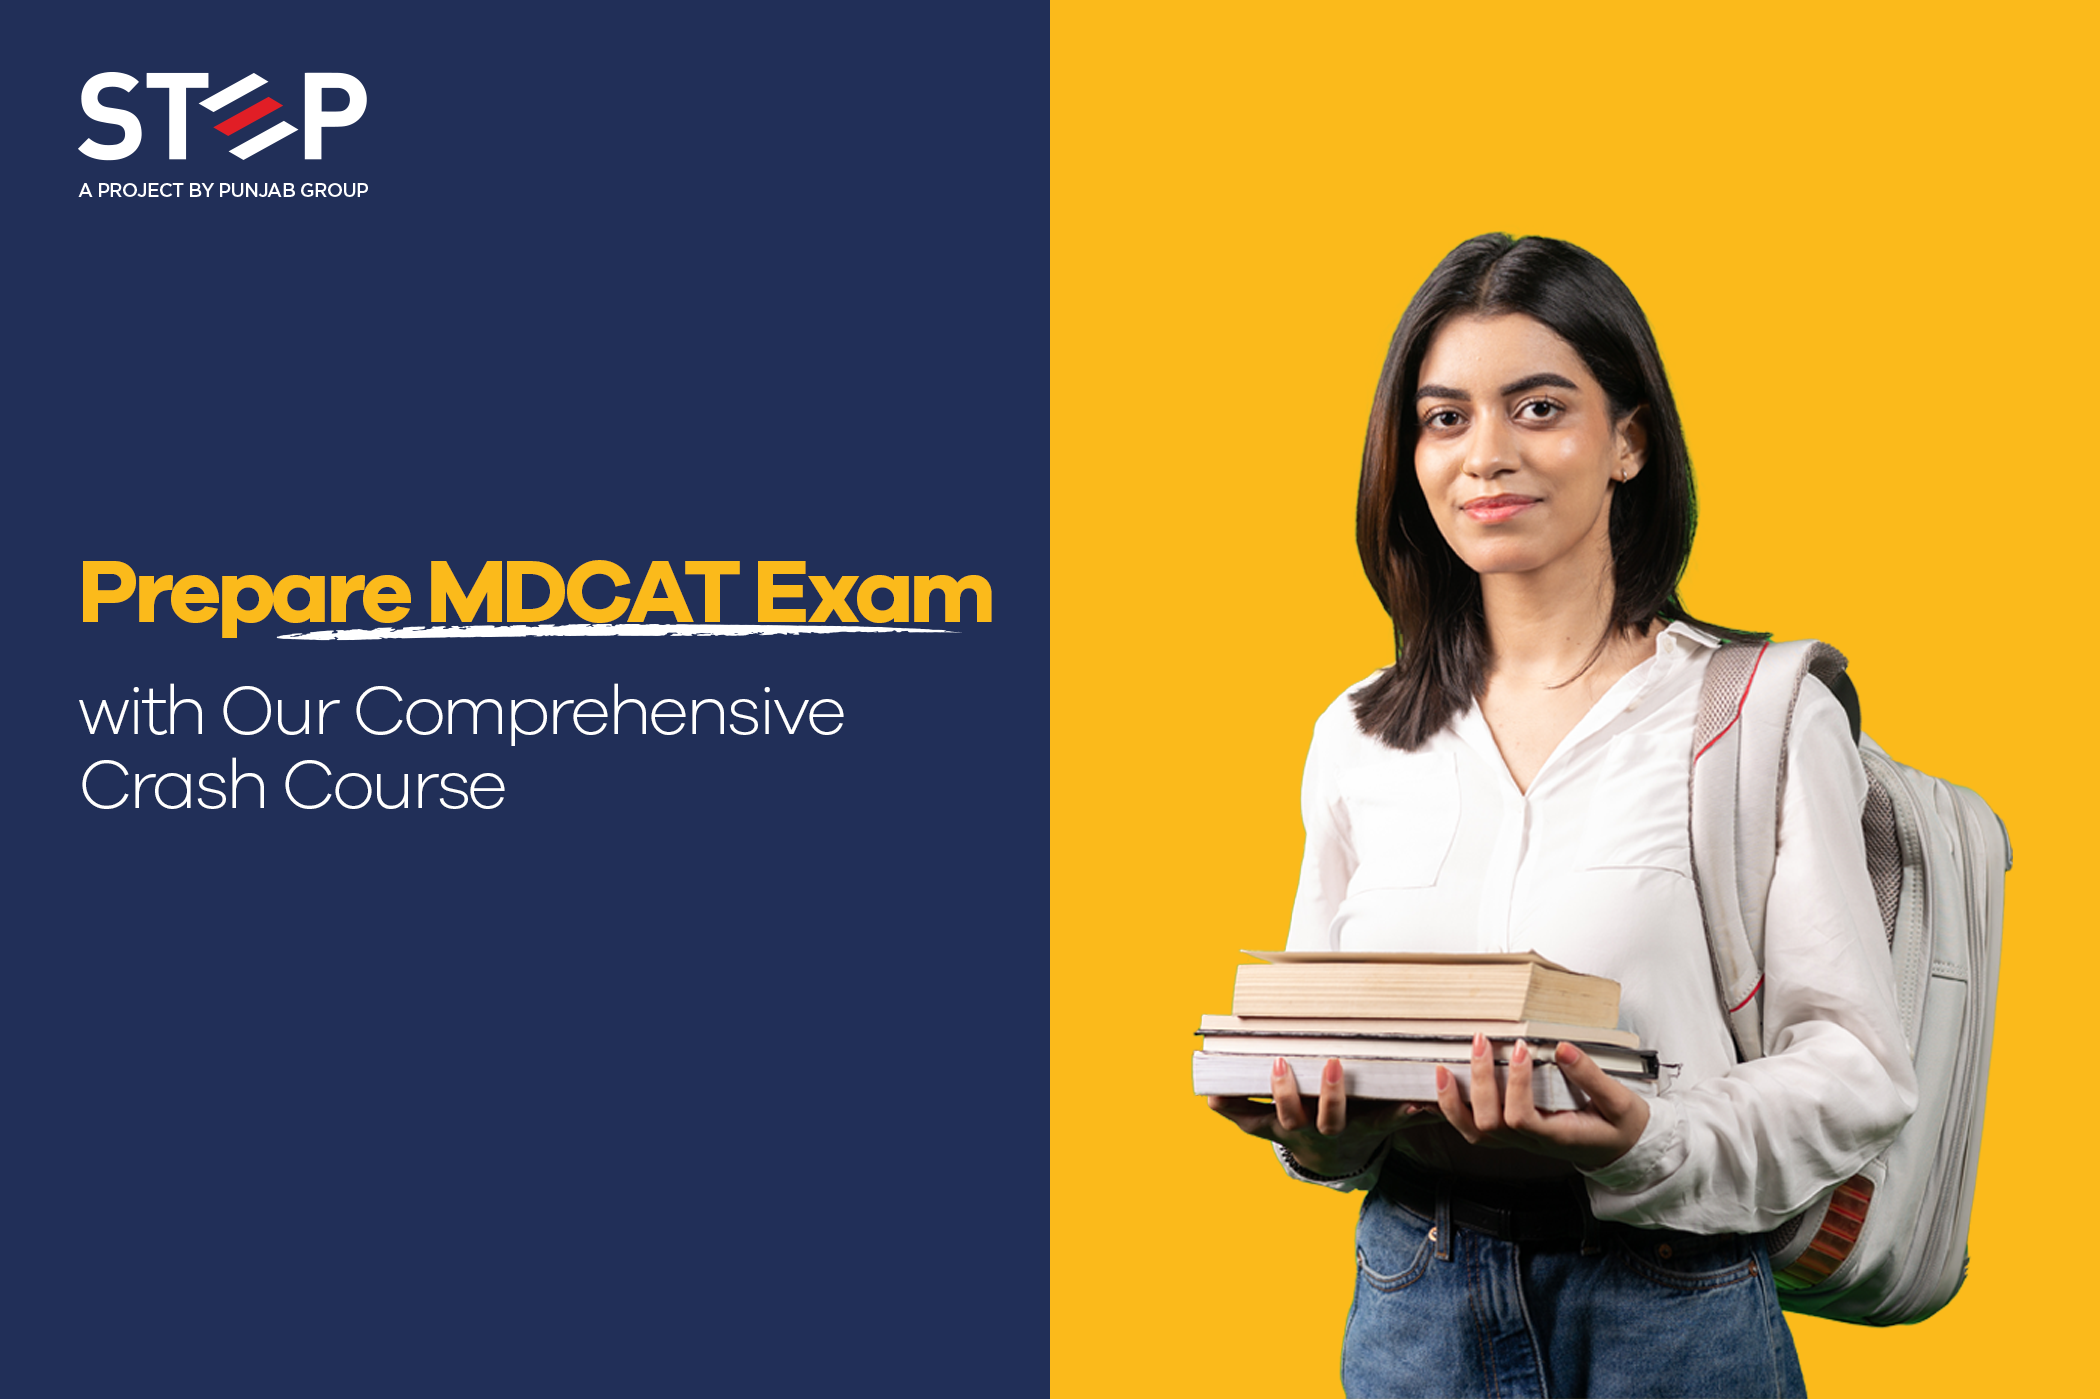 Prepare MDCAT Exam with Our Comprehensive Crash Course